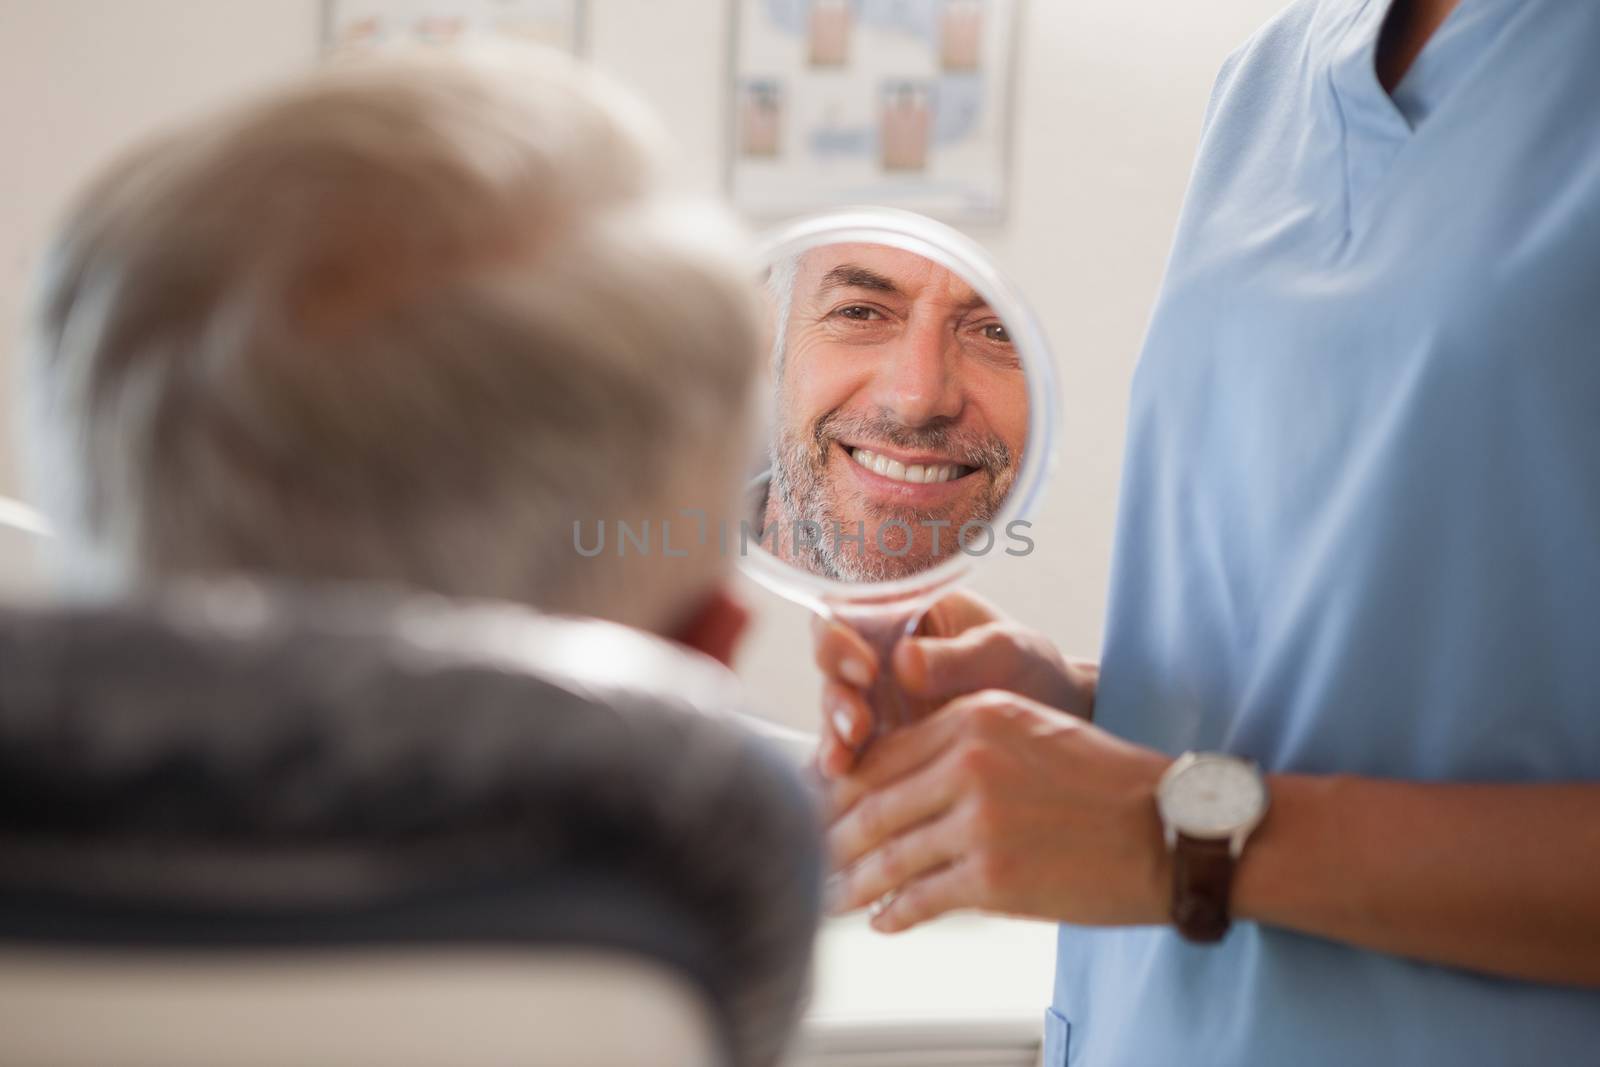 Dentist showing patient his new smile in the mirror by Wavebreakmedia